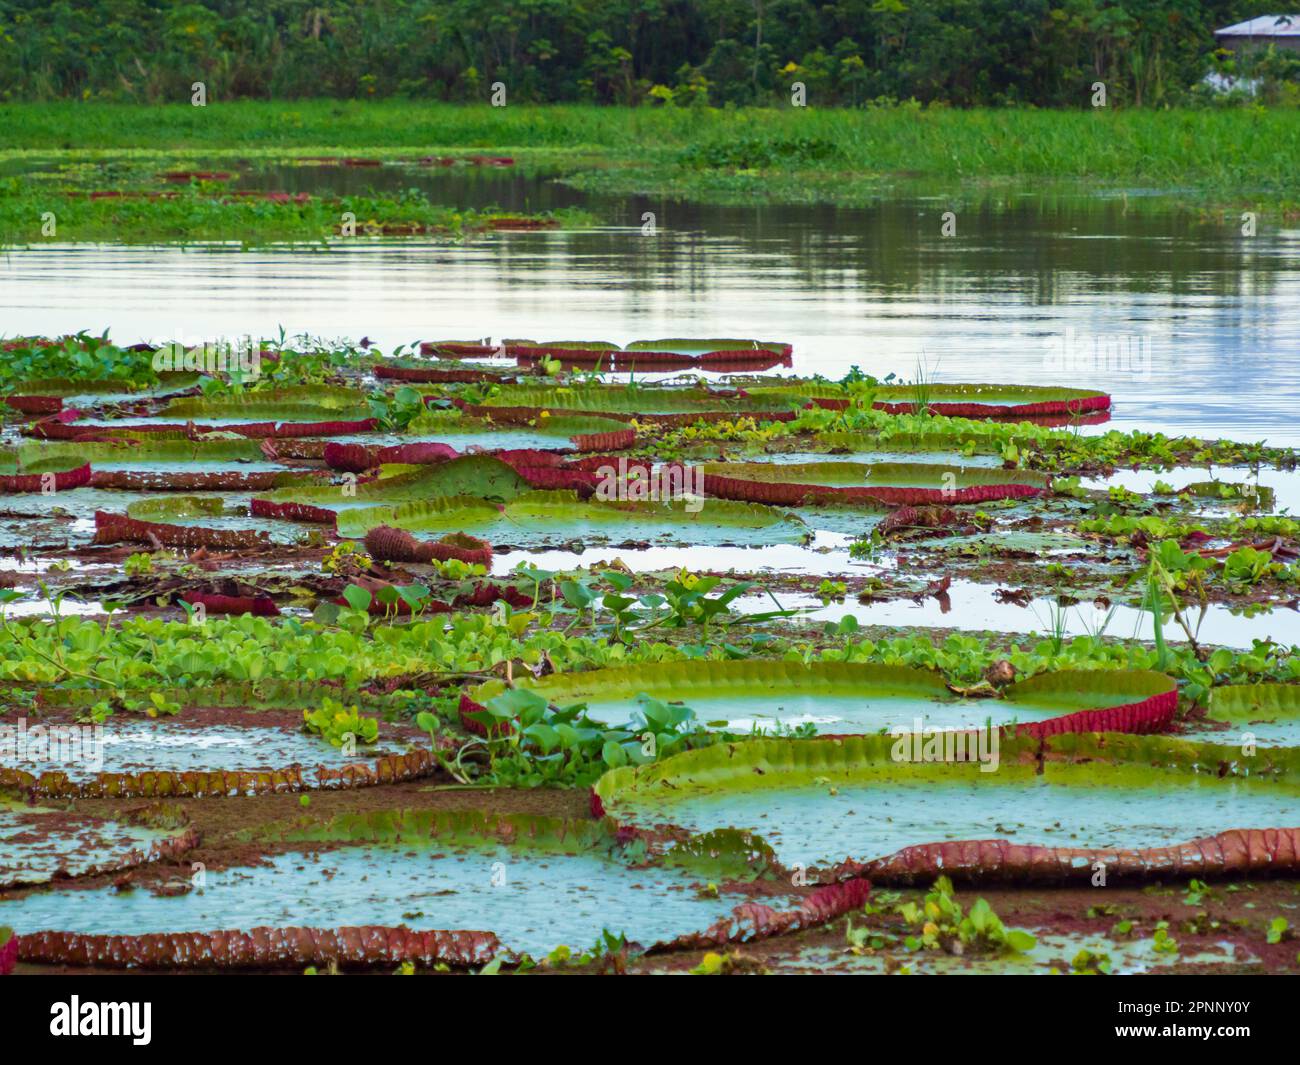 Victoria amazonica in Pacaya Samiria National Reserve. It is a species of flowering plant, the largest of the Nymphaeaceae family of water lilies. Ama Stock Photo